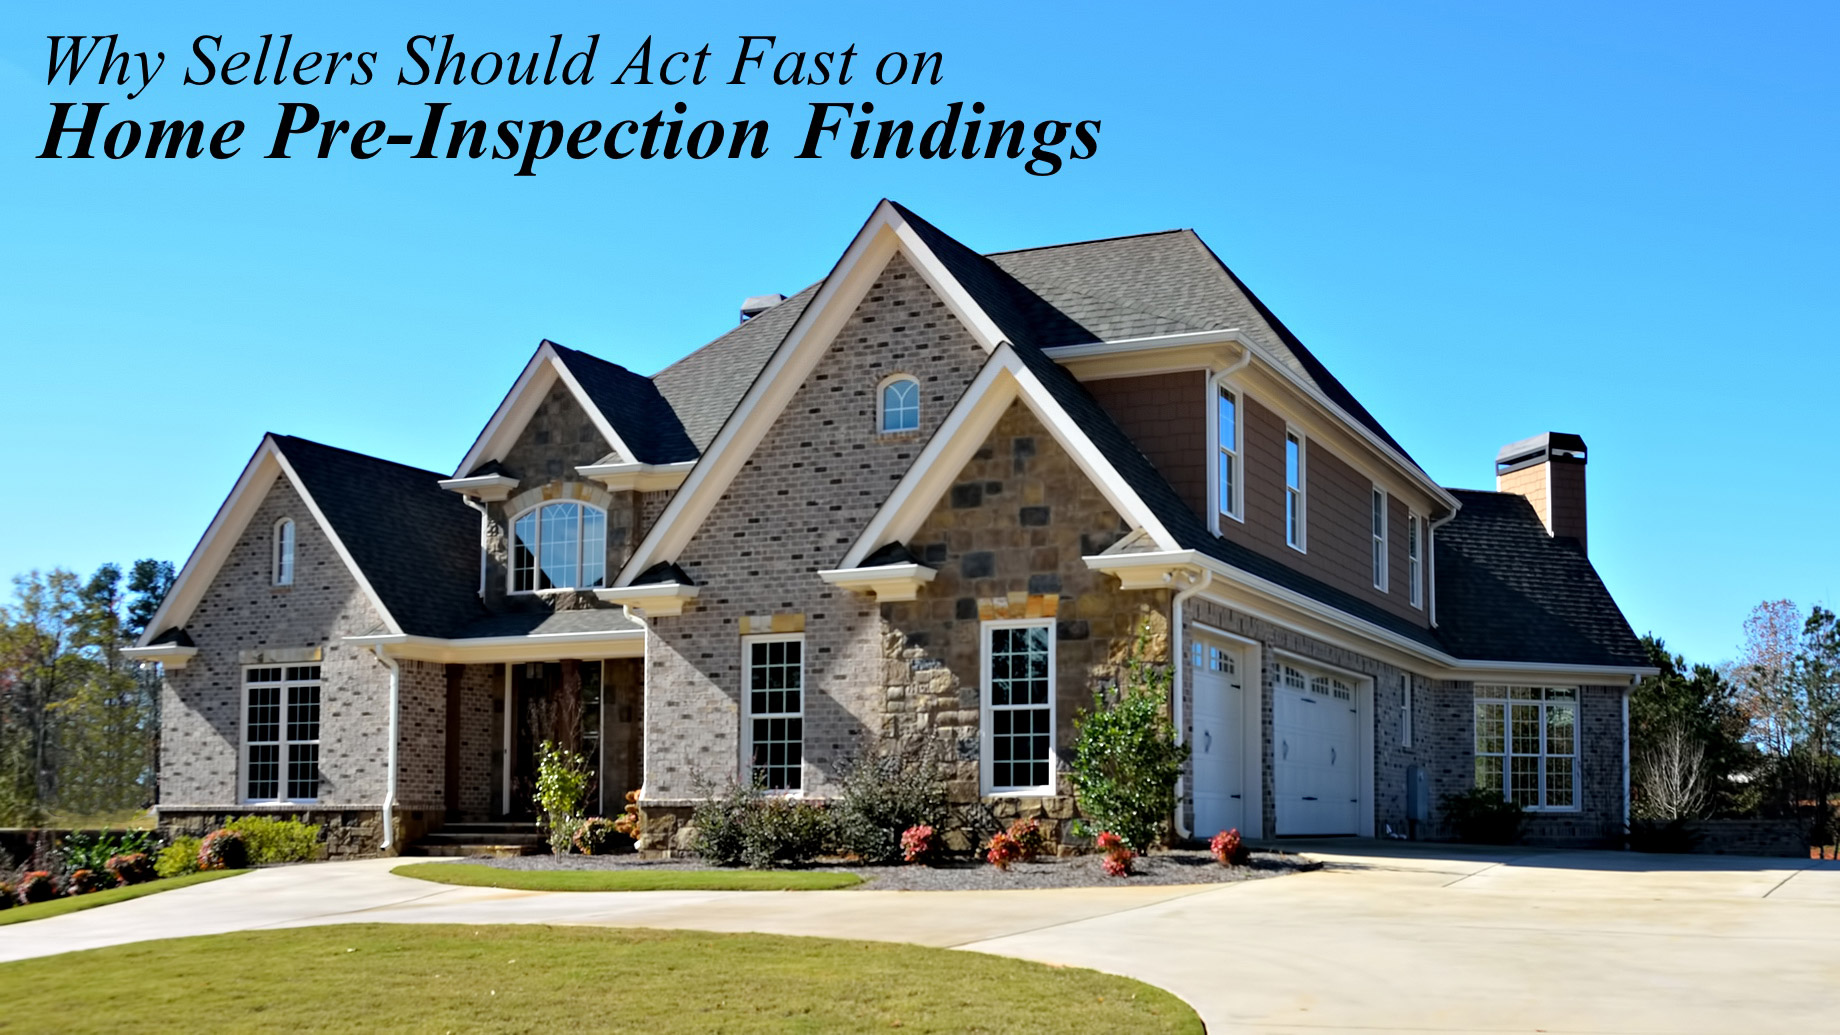 Real Estate Tips - Why Sellers Should Act Fast on Home Pre-Inspection Findings